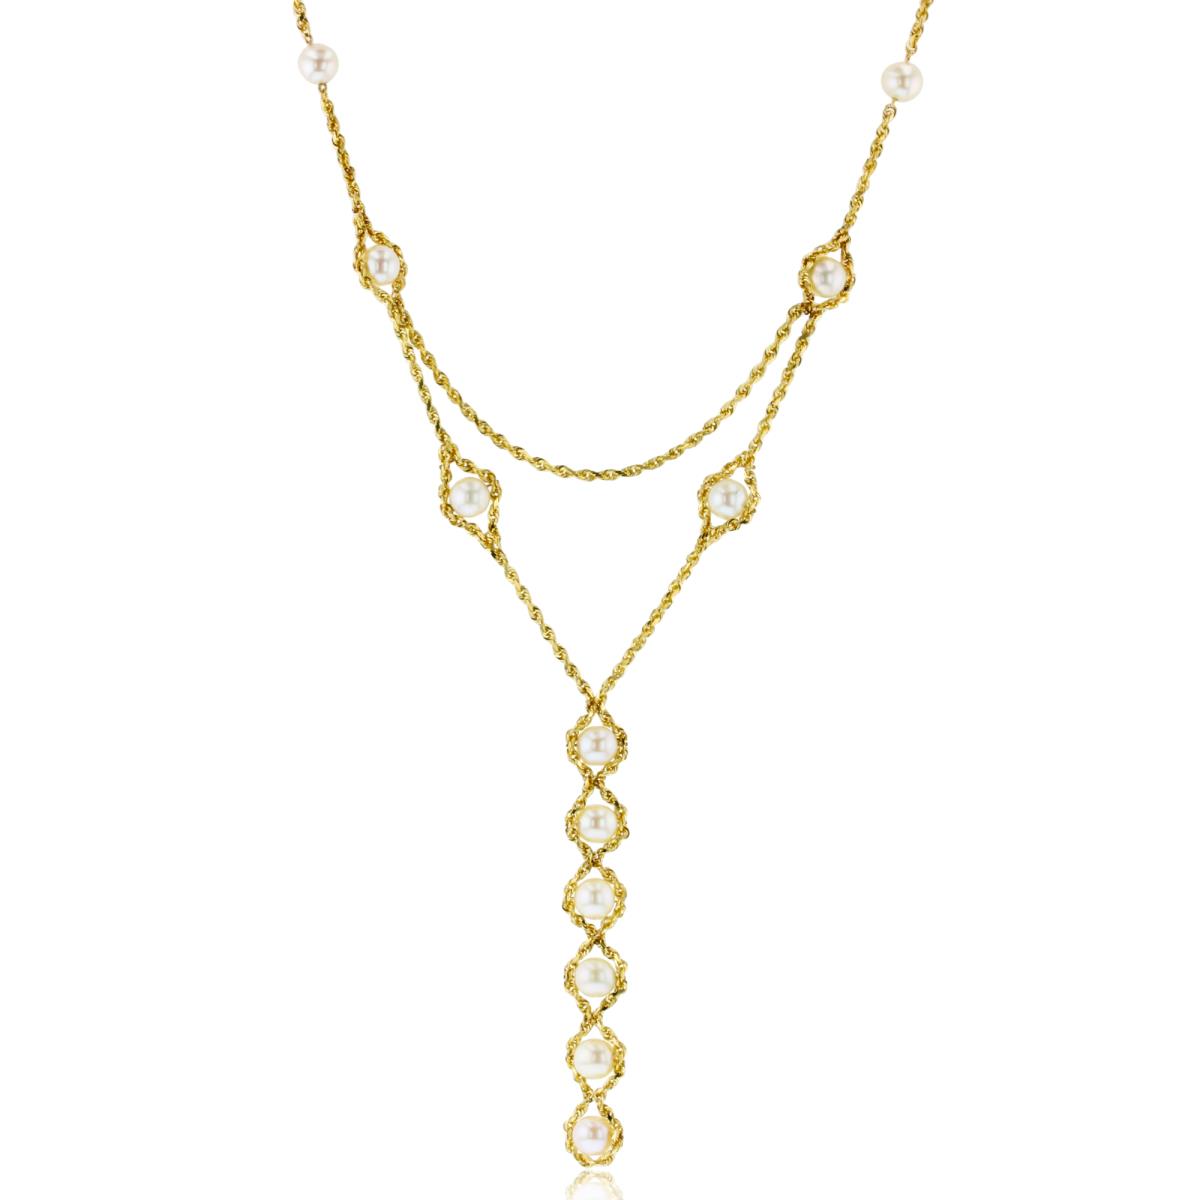 10K Yellow Gold 6mm White Pearl Vertical Flexi Dangling Wrapped with Chain 18"Necklace